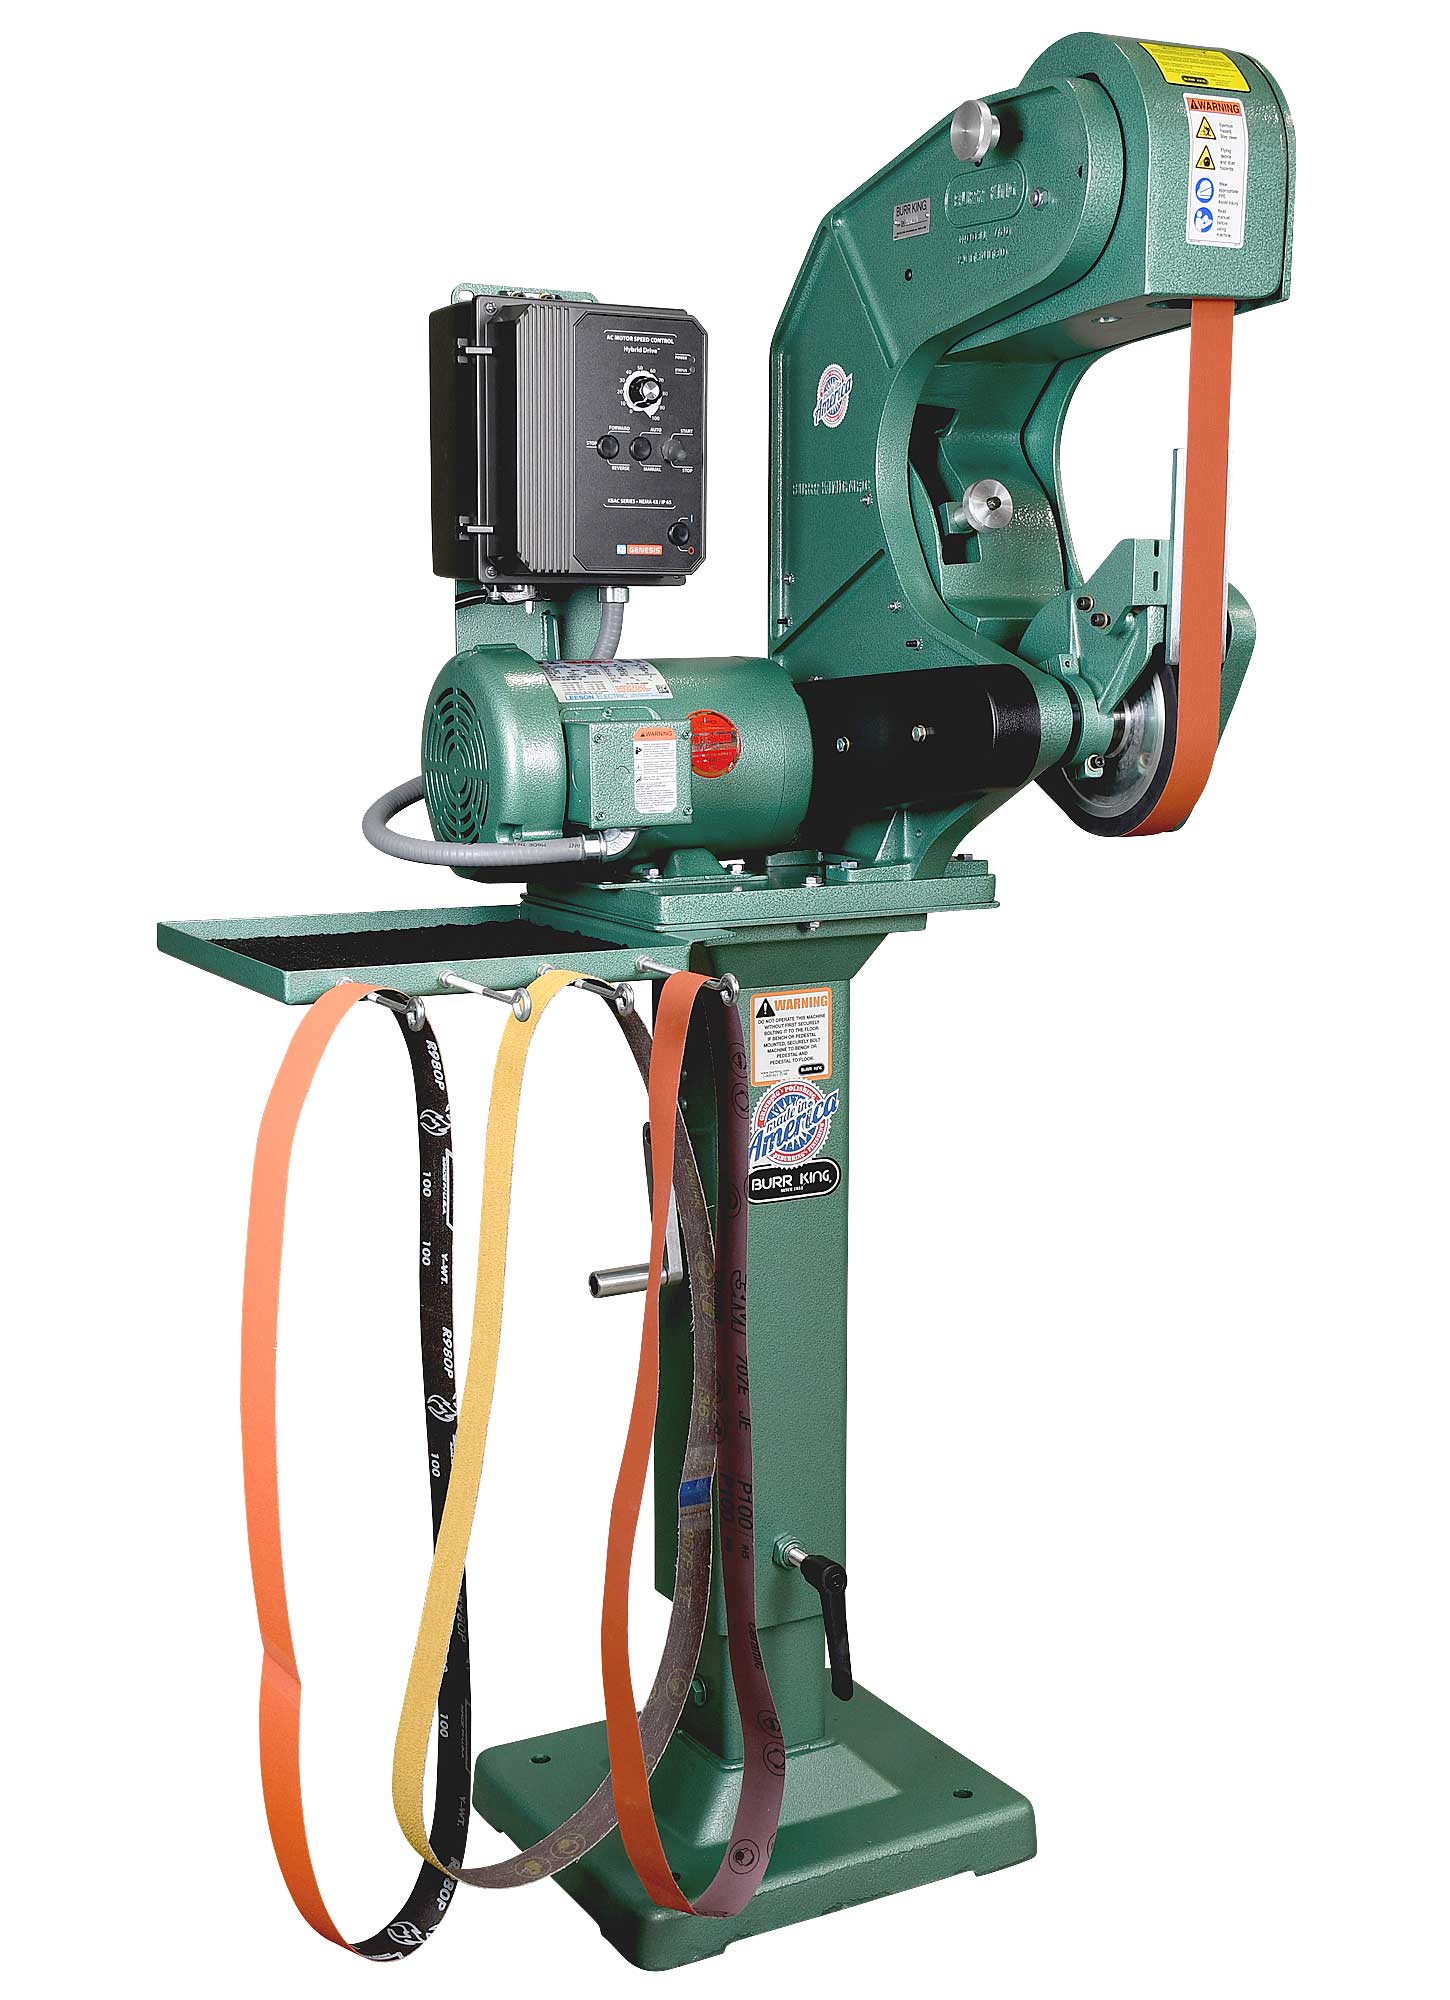 72110 shown with optional 01-10 adjustable pedestal and 760T-2 tool tray.